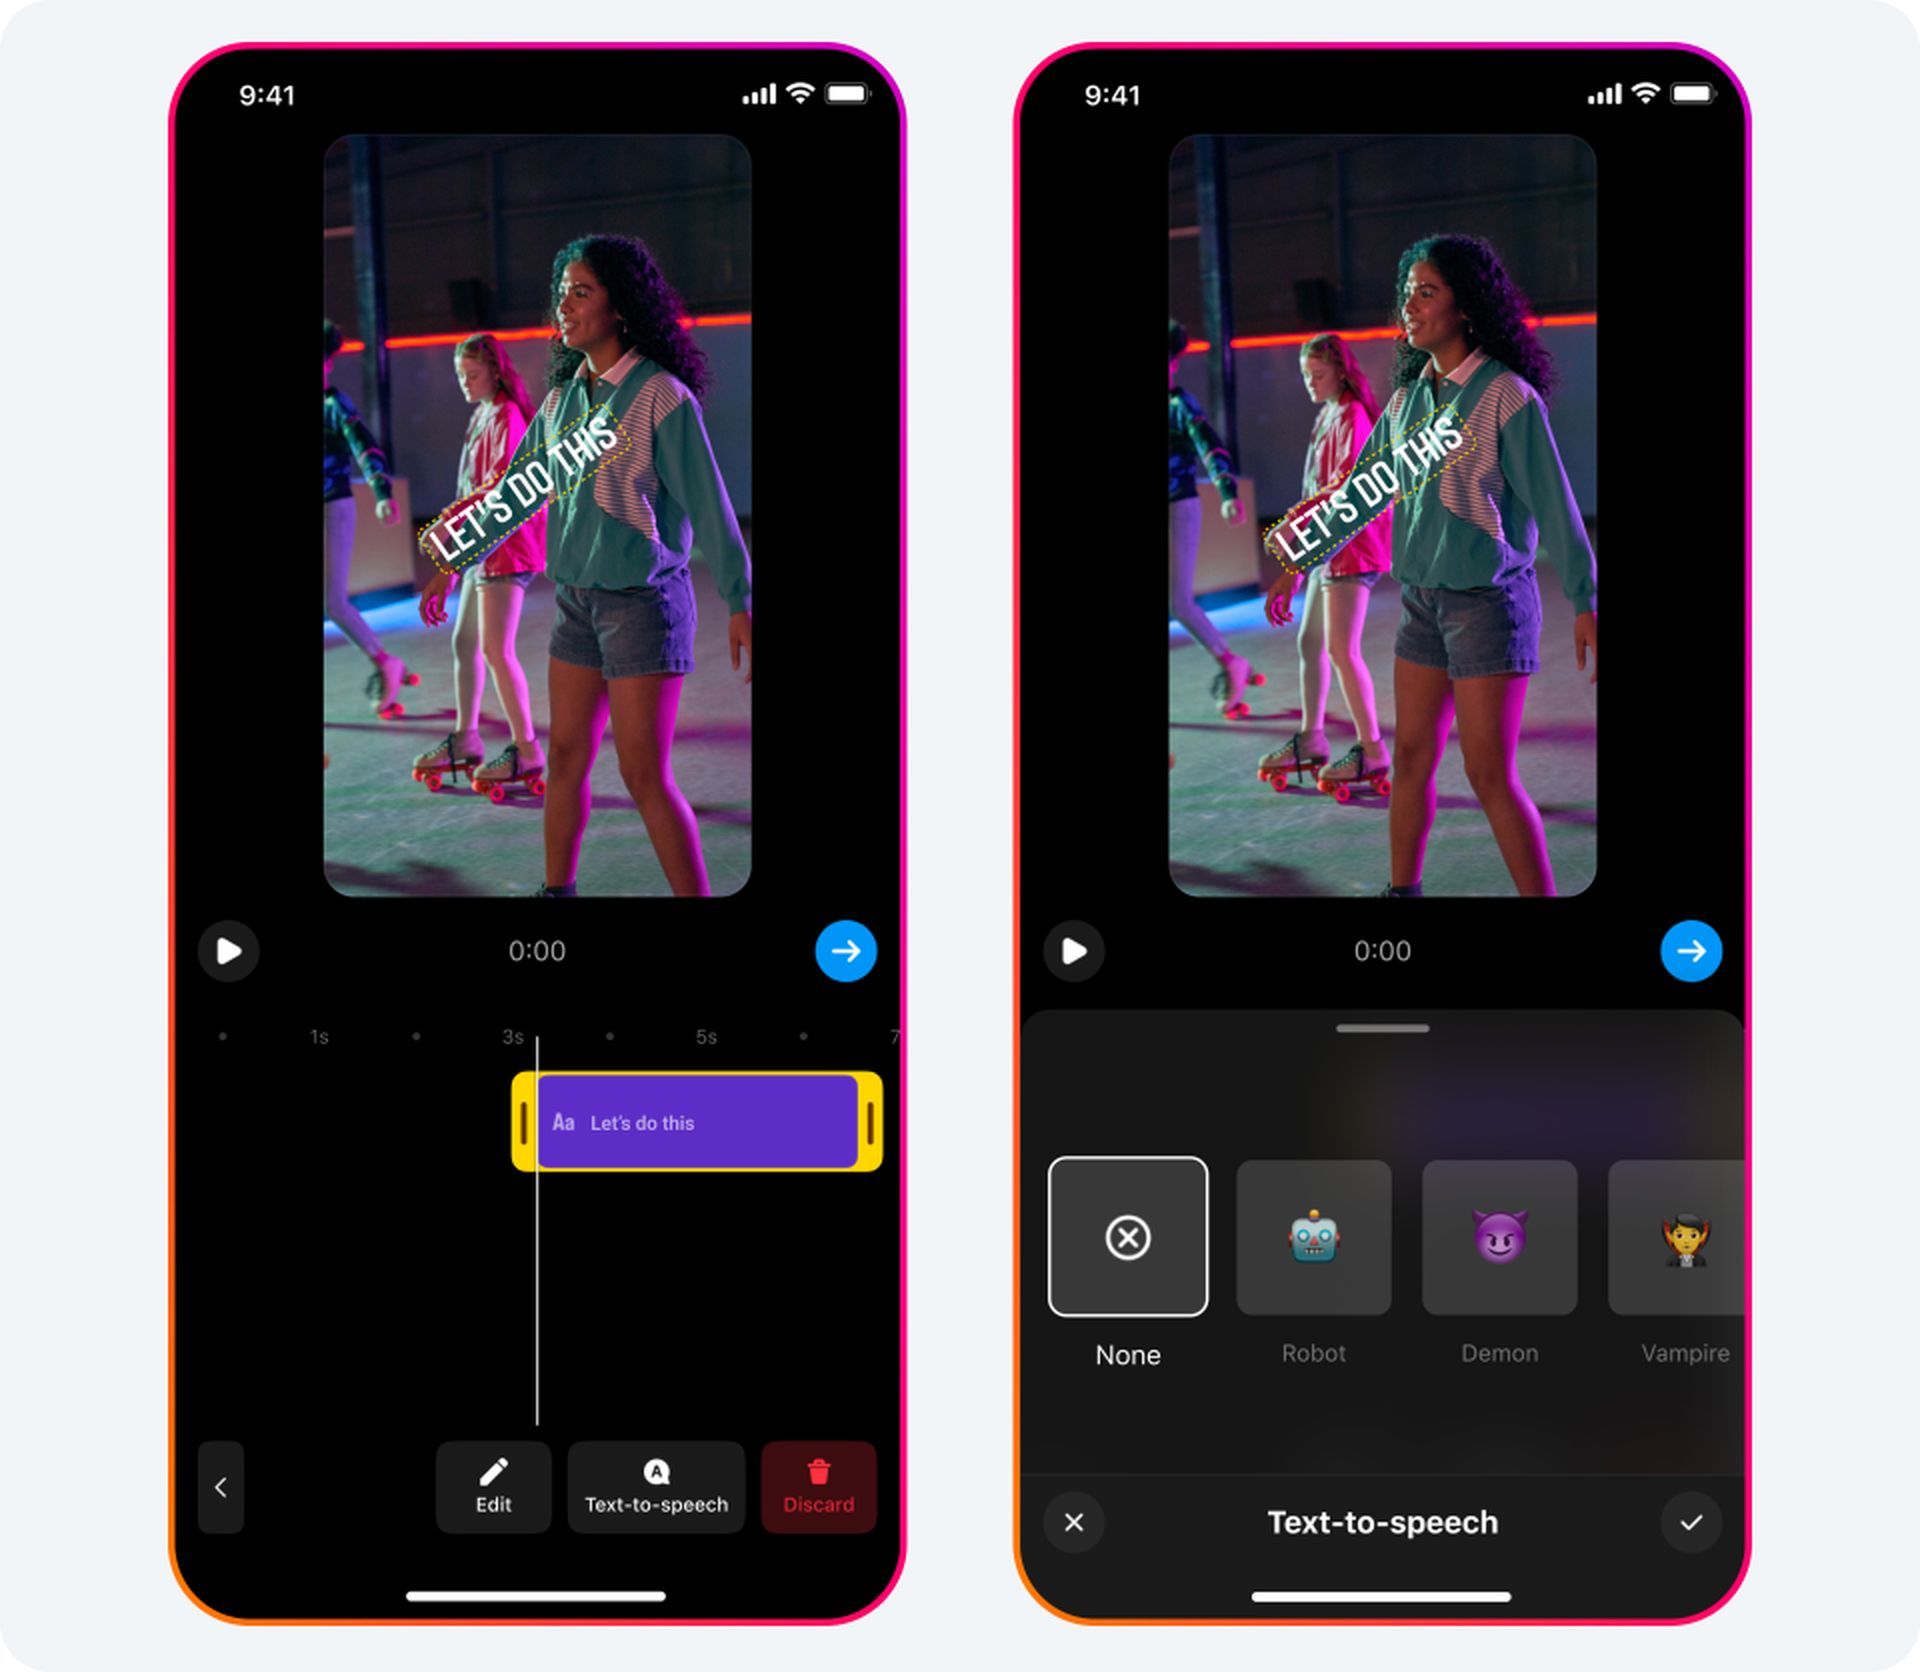 Instagram unveils exciting creation tools for Reels and Stories